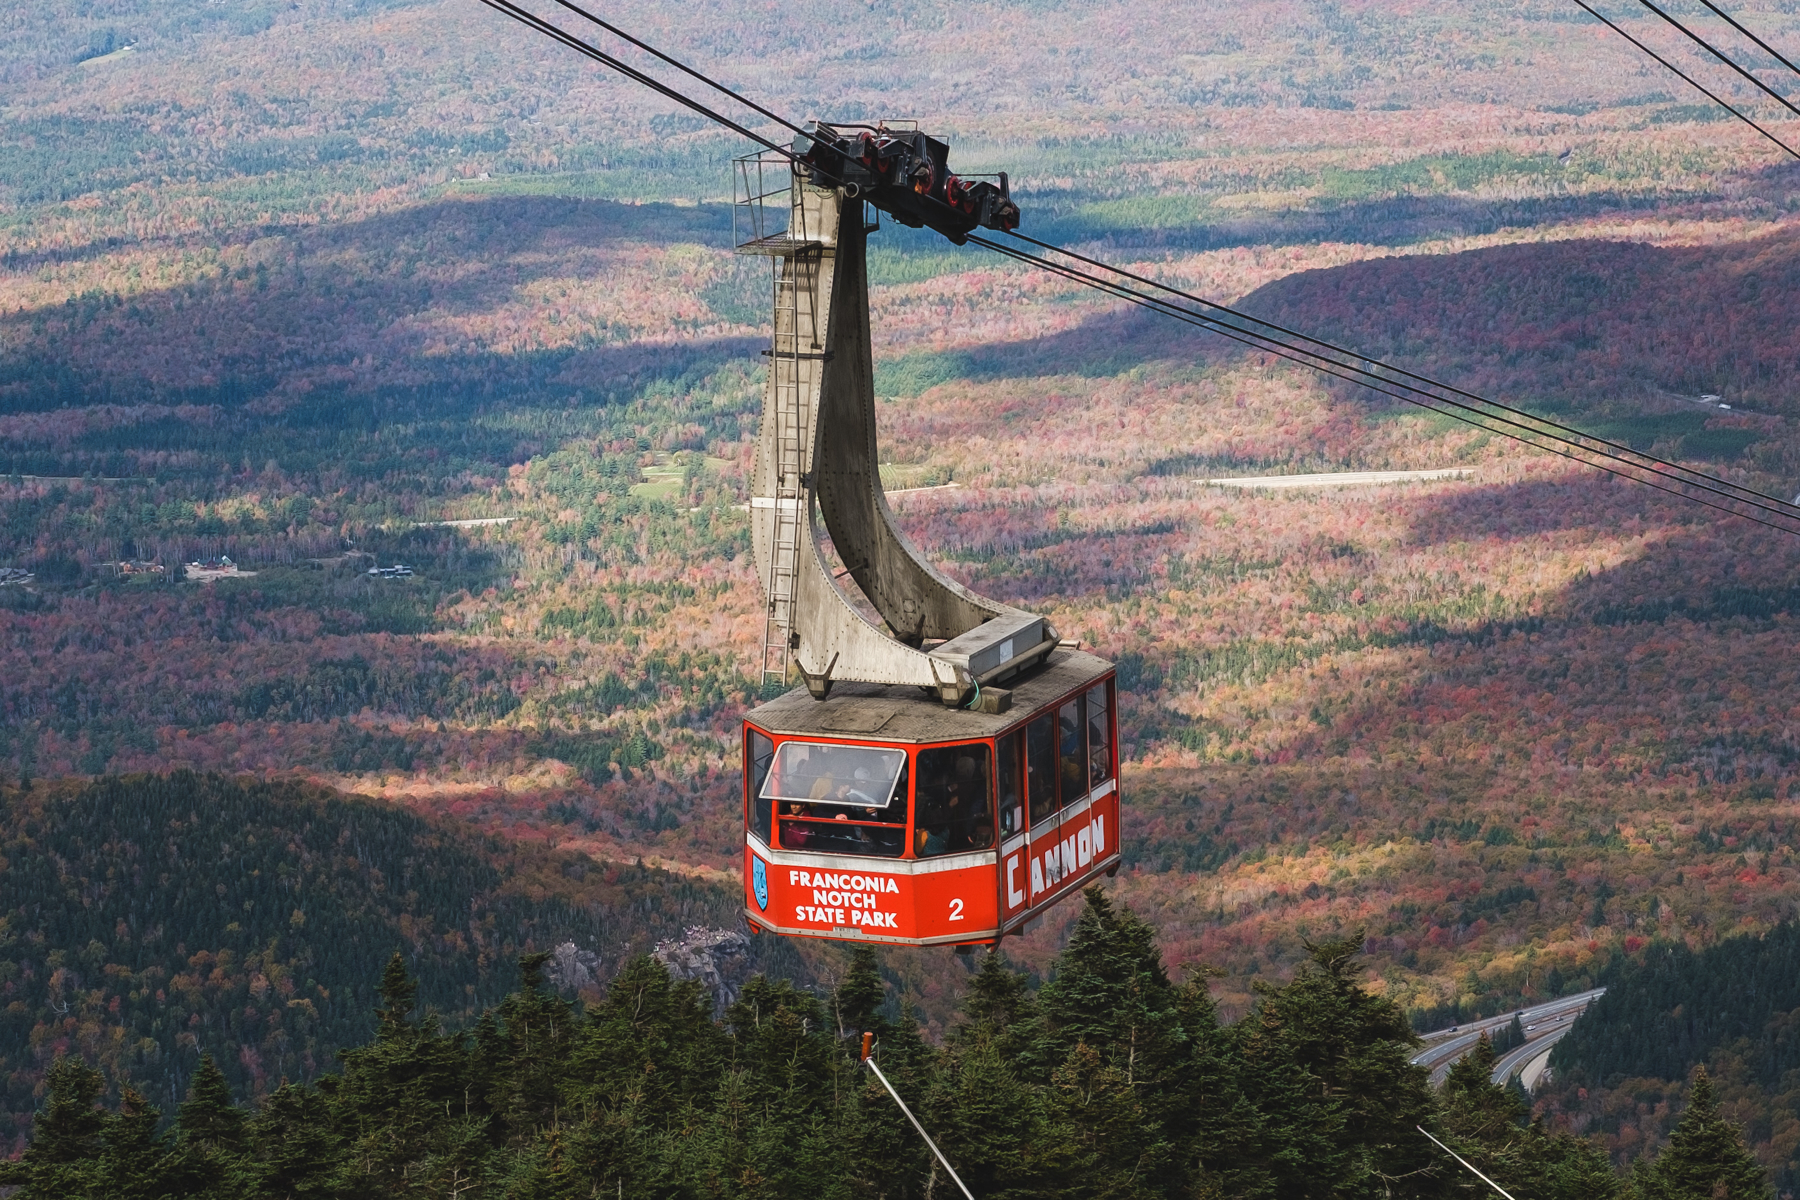 A red cable car with “Franconia Notch State Park” and “Cannon” written on it above mountains with autumn foliage.